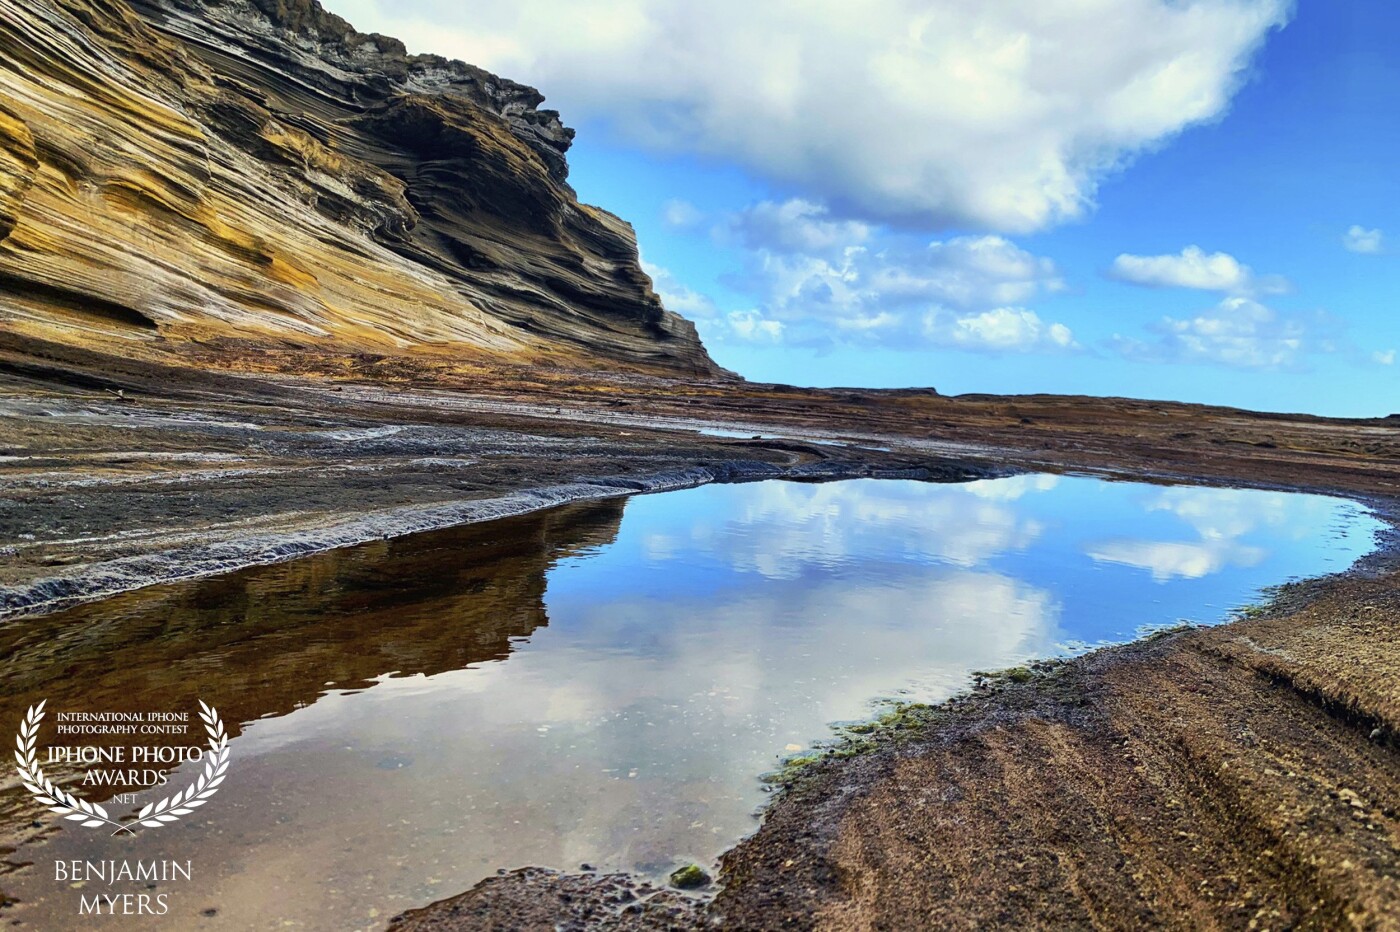 I climbed down off of the main road under a bridge to take this shot of the reflections in the water. The waves crash against the rocks and leave giant pools behind as the Pacific retreats back, away from the cliff. It was a beautiful day. 